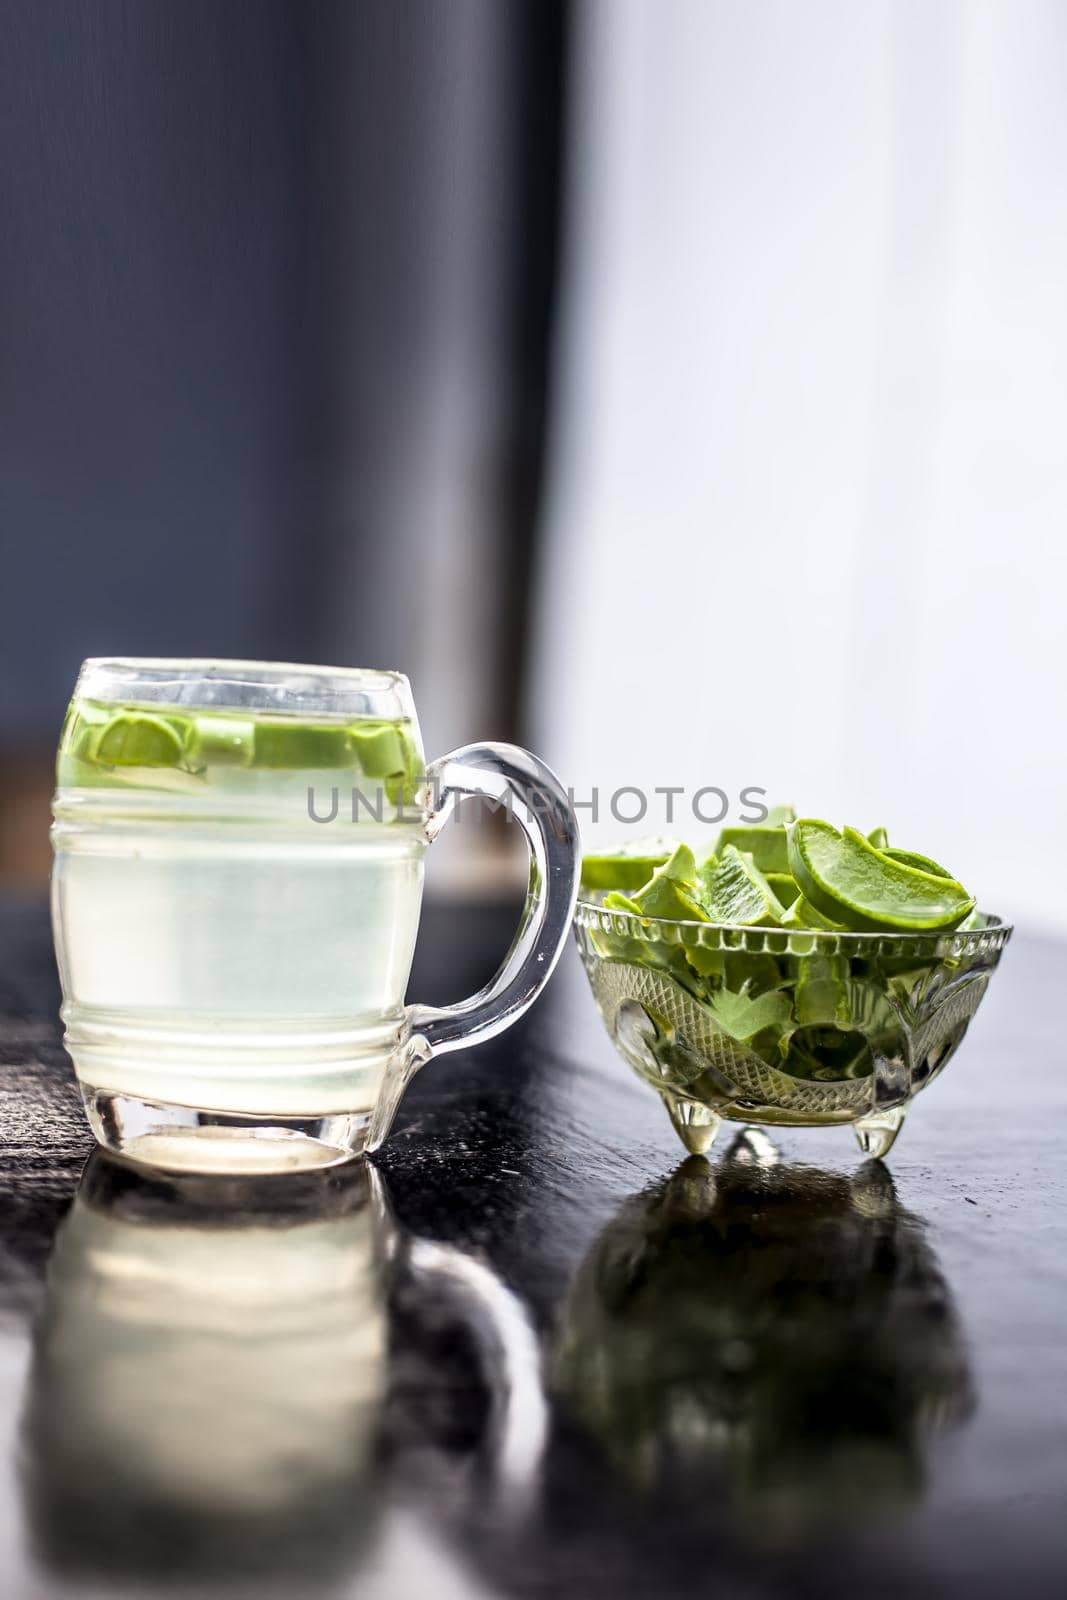 Close up of glass mug on wooden surface containing aloe vera detox drink in along with its entire raw ingredients with it. Vertical shot with blurred background. by mirzamlk